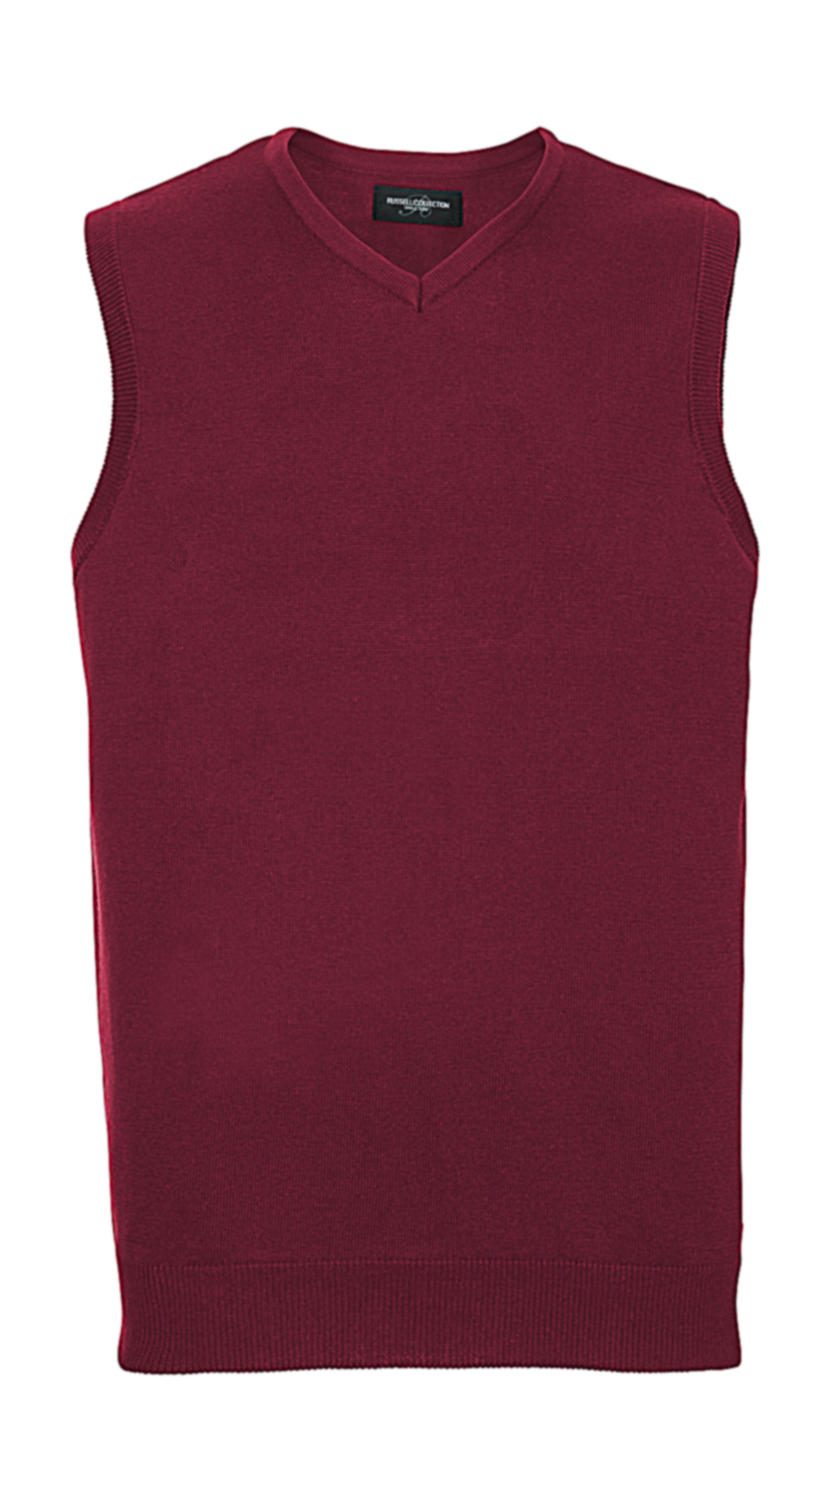  Adults V-Neck Sleeveless Knitted Pullover in Farbe Cranberry Marl